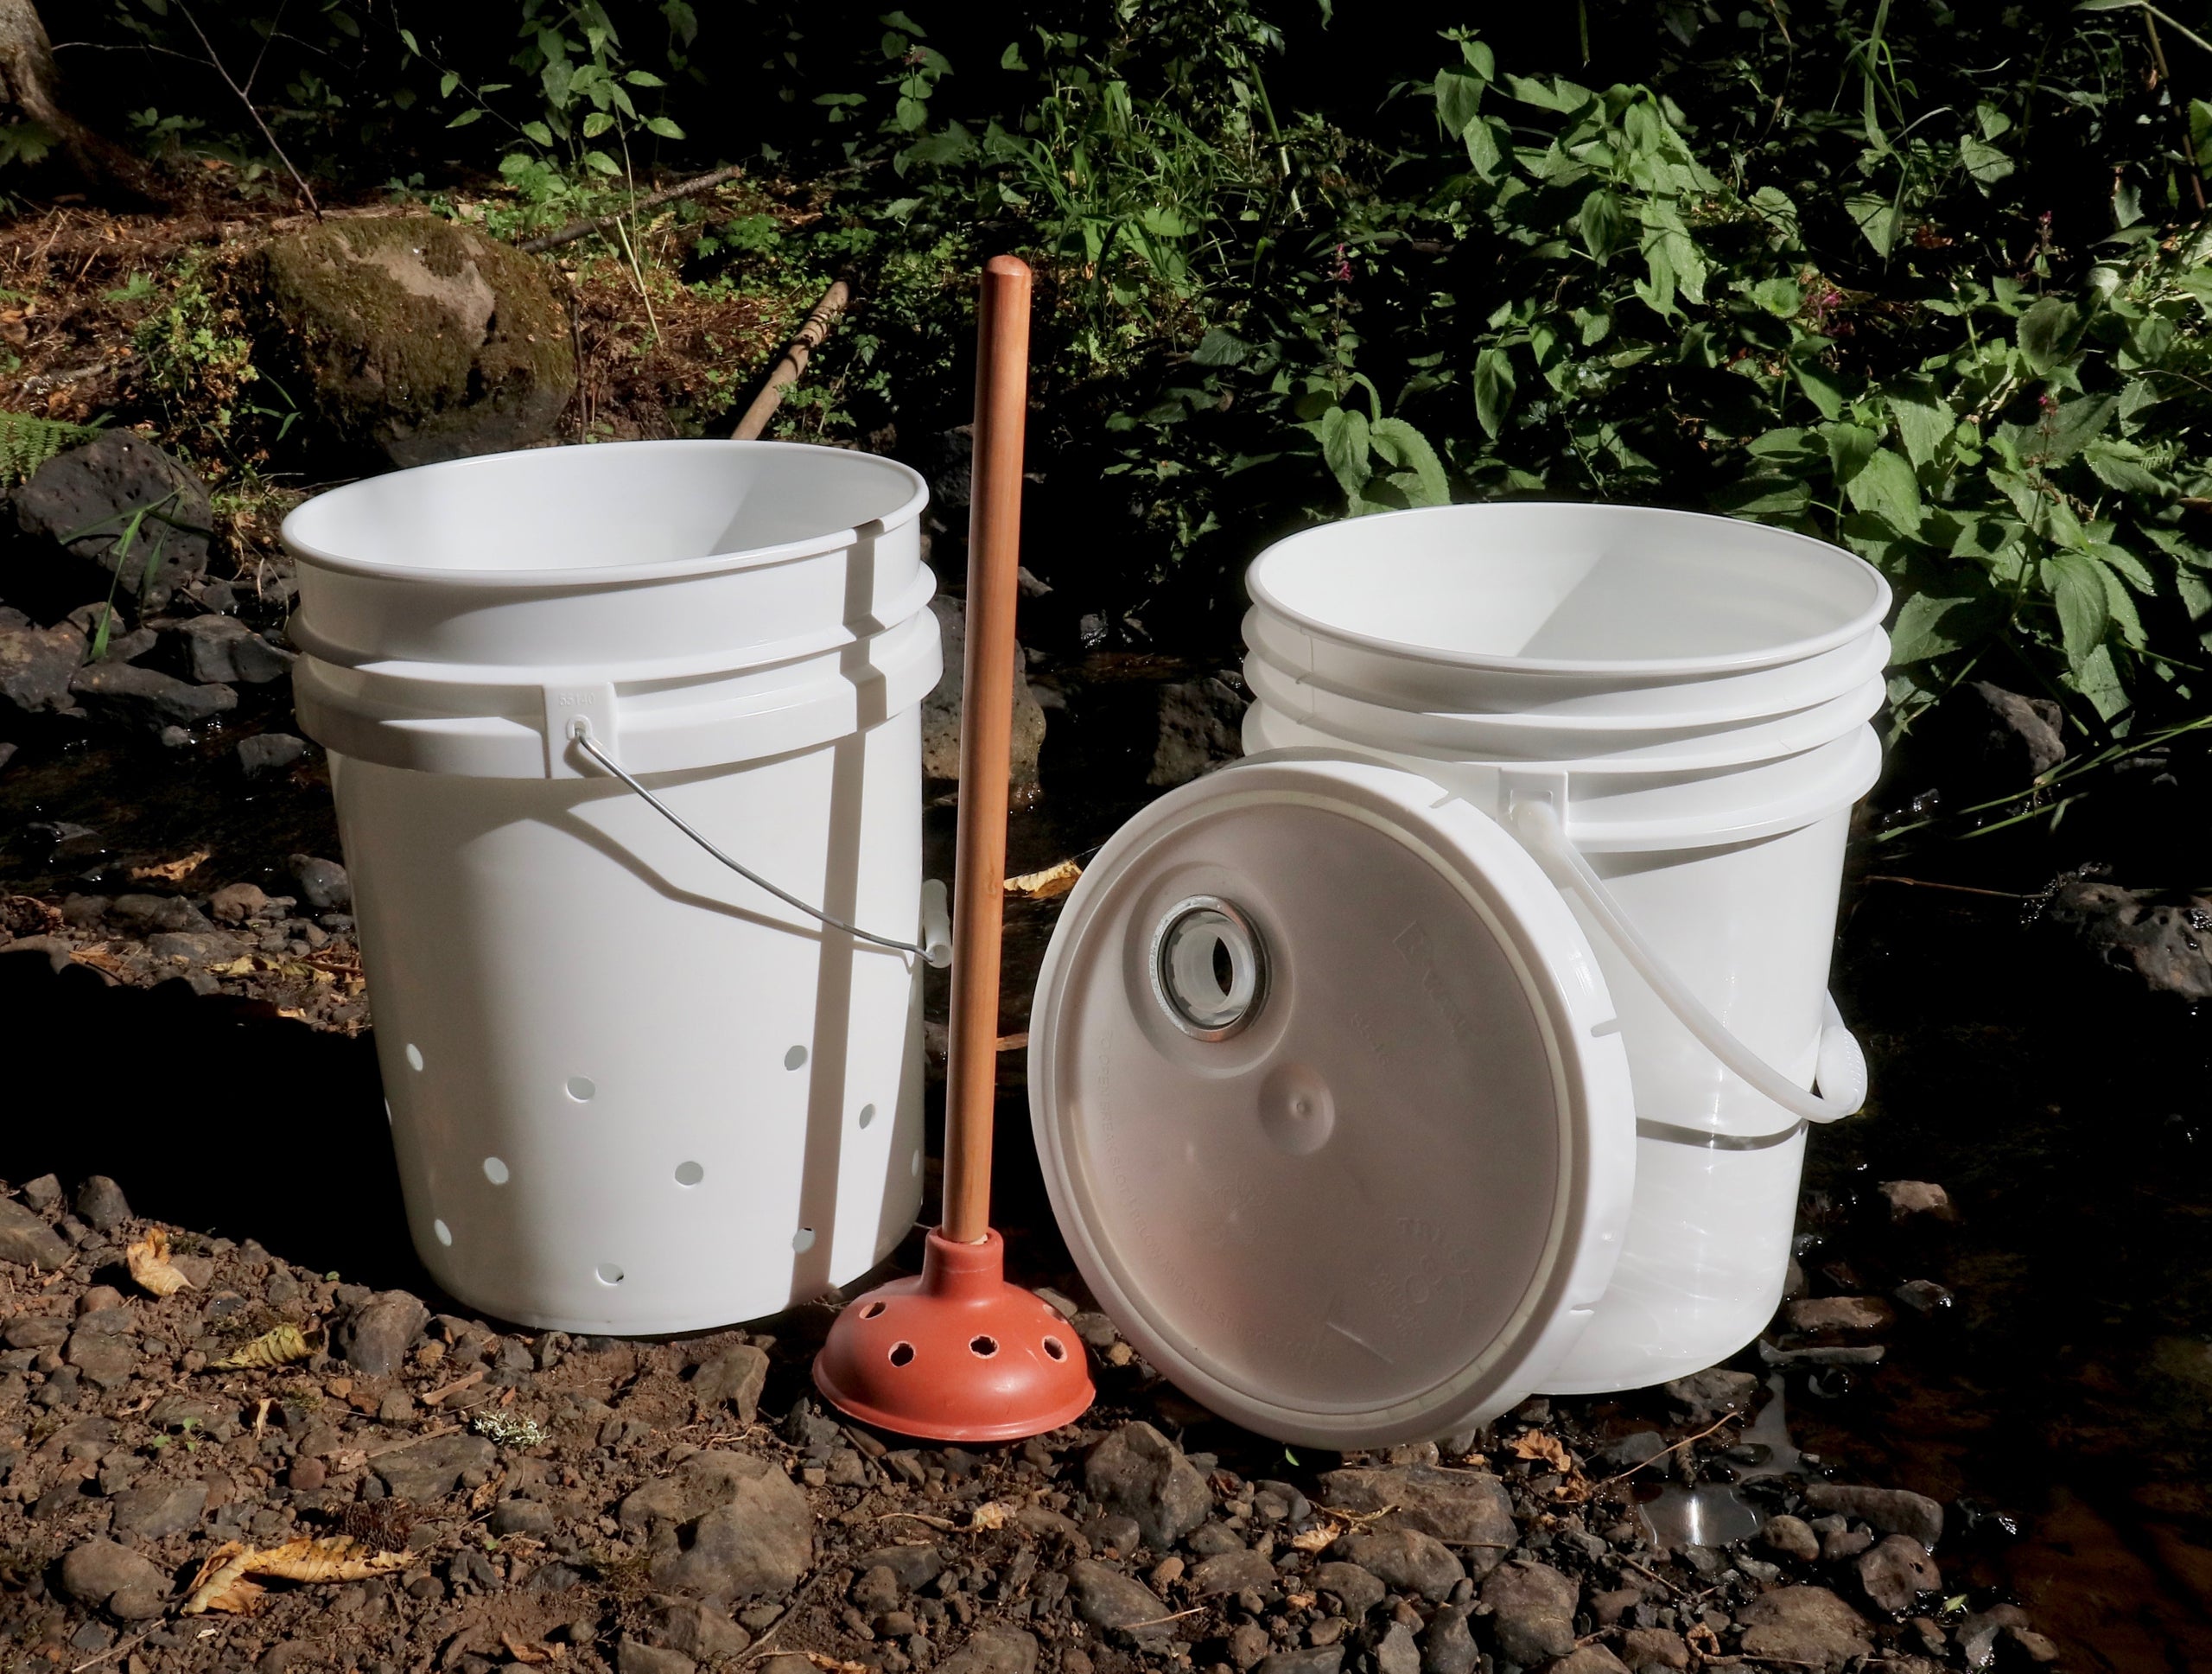 Make a camp washing machine using bucket and plunger